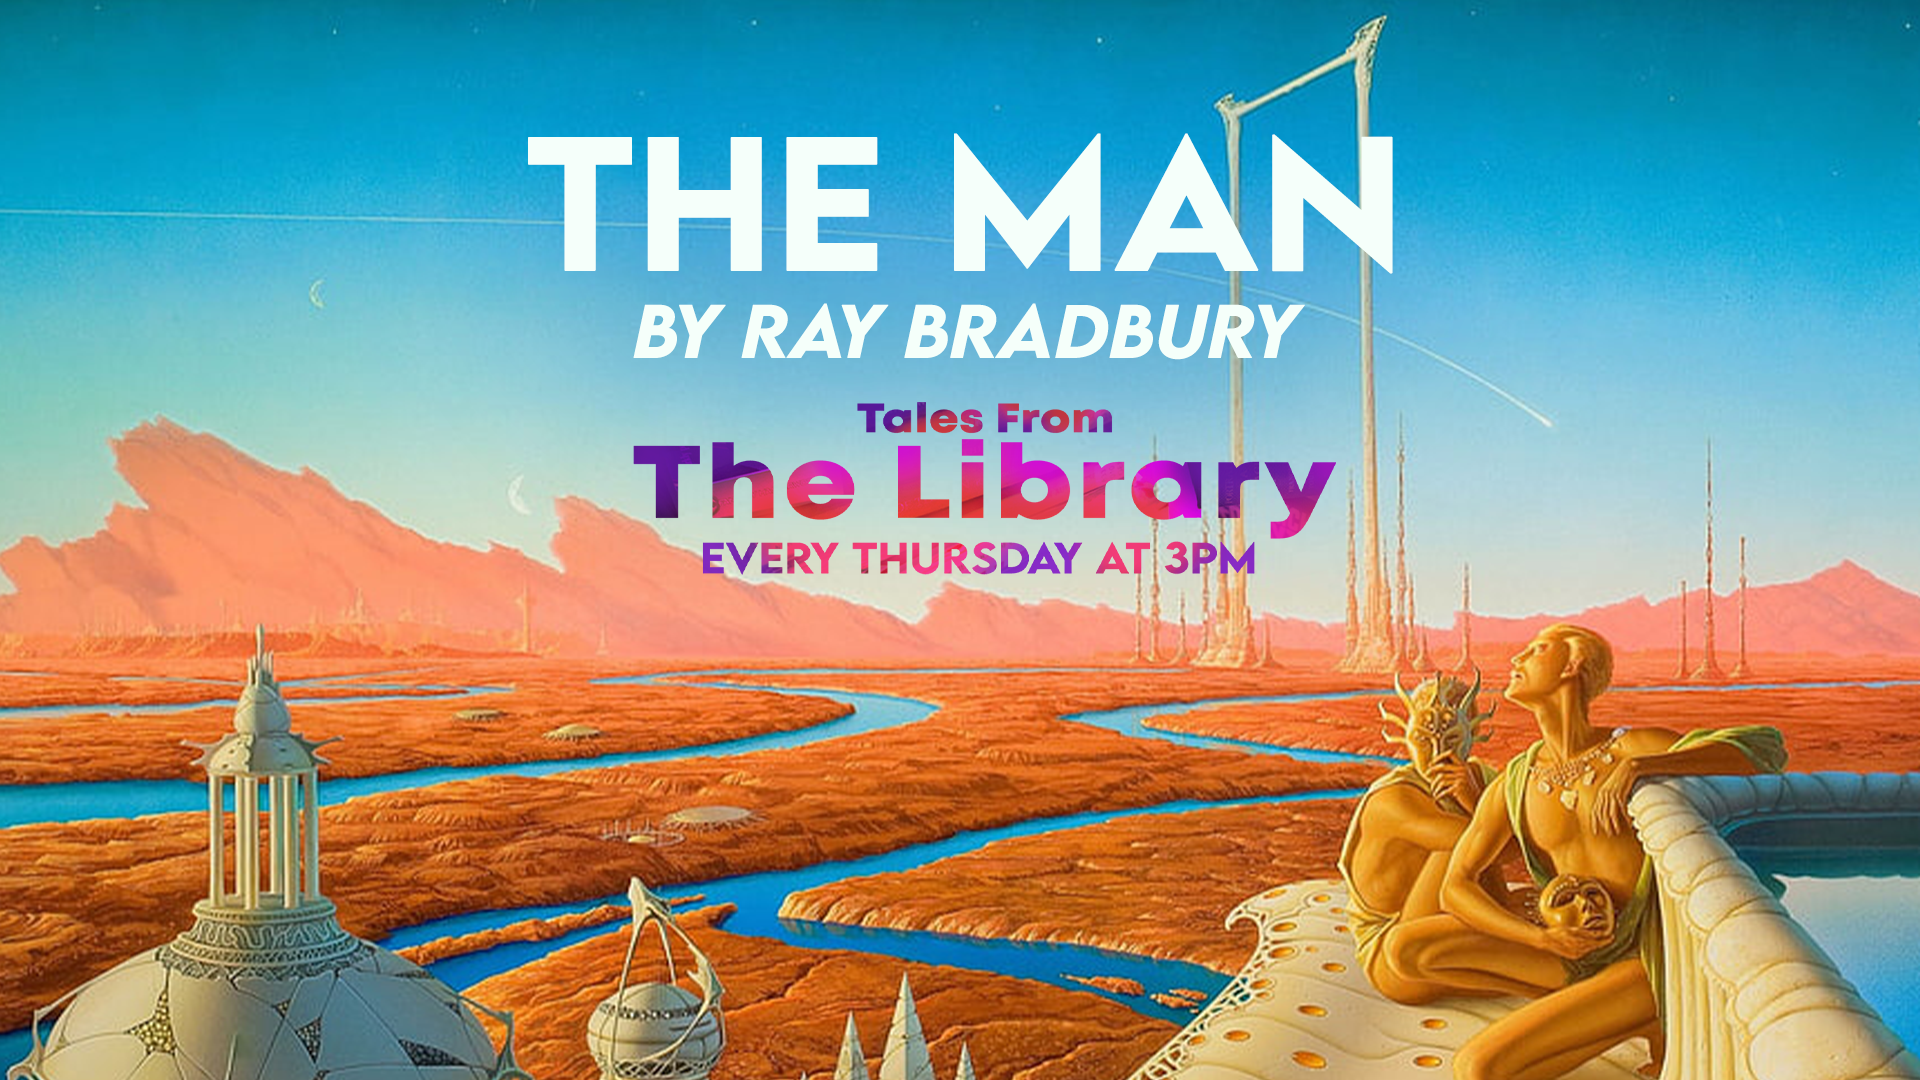 Tales From The Library - The Man